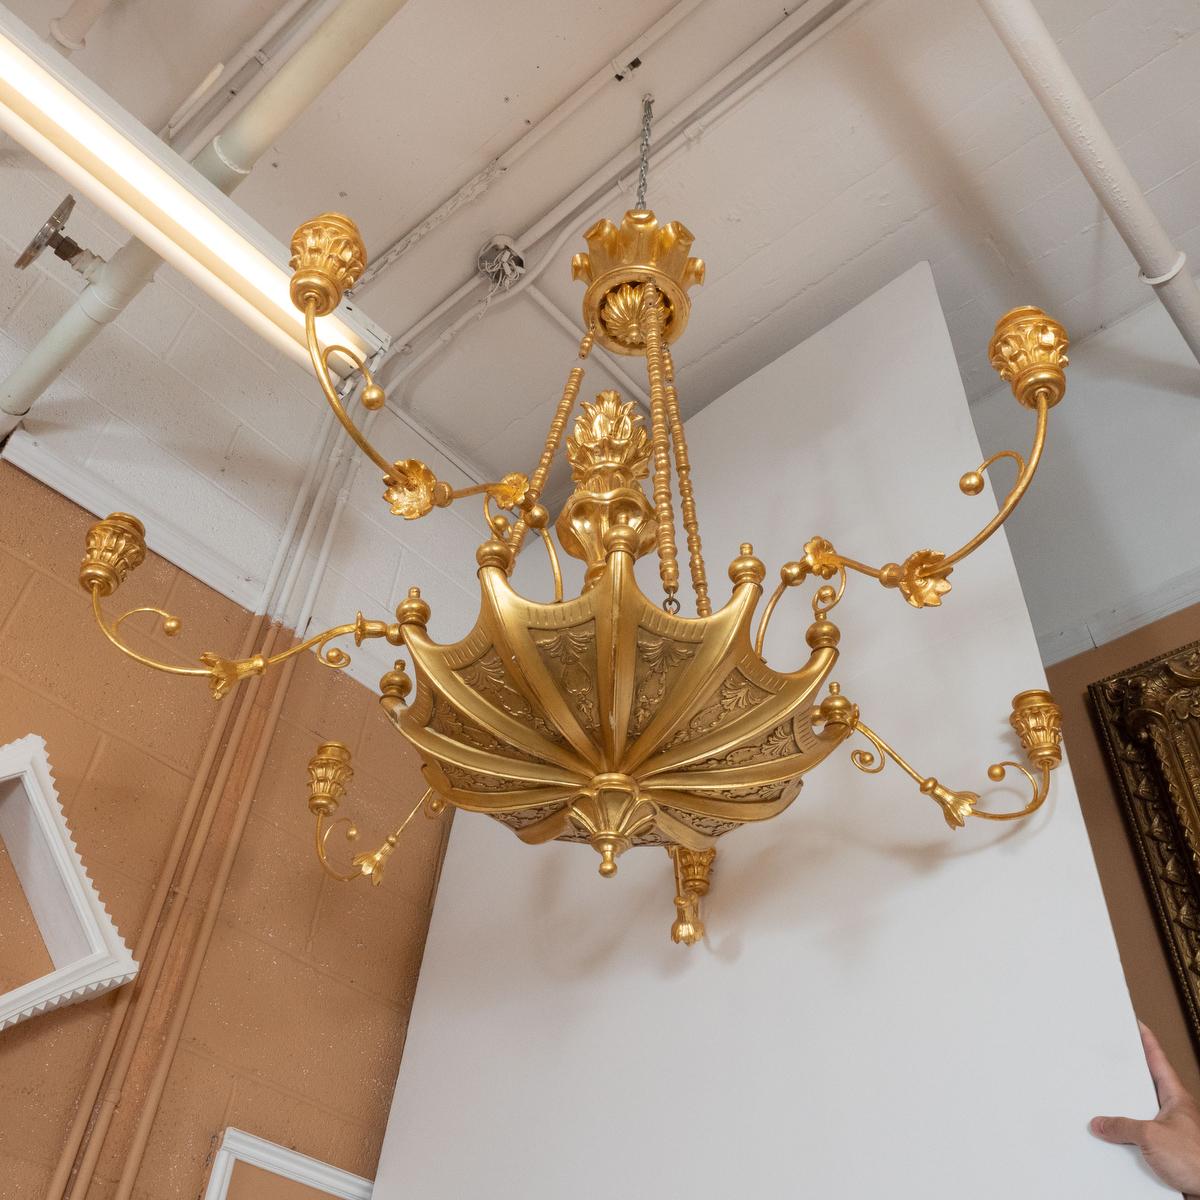 22k gold giltwood woodcarving chandelier with mixed umbrella and foliate motif by master woodworker Carlos Villegas.